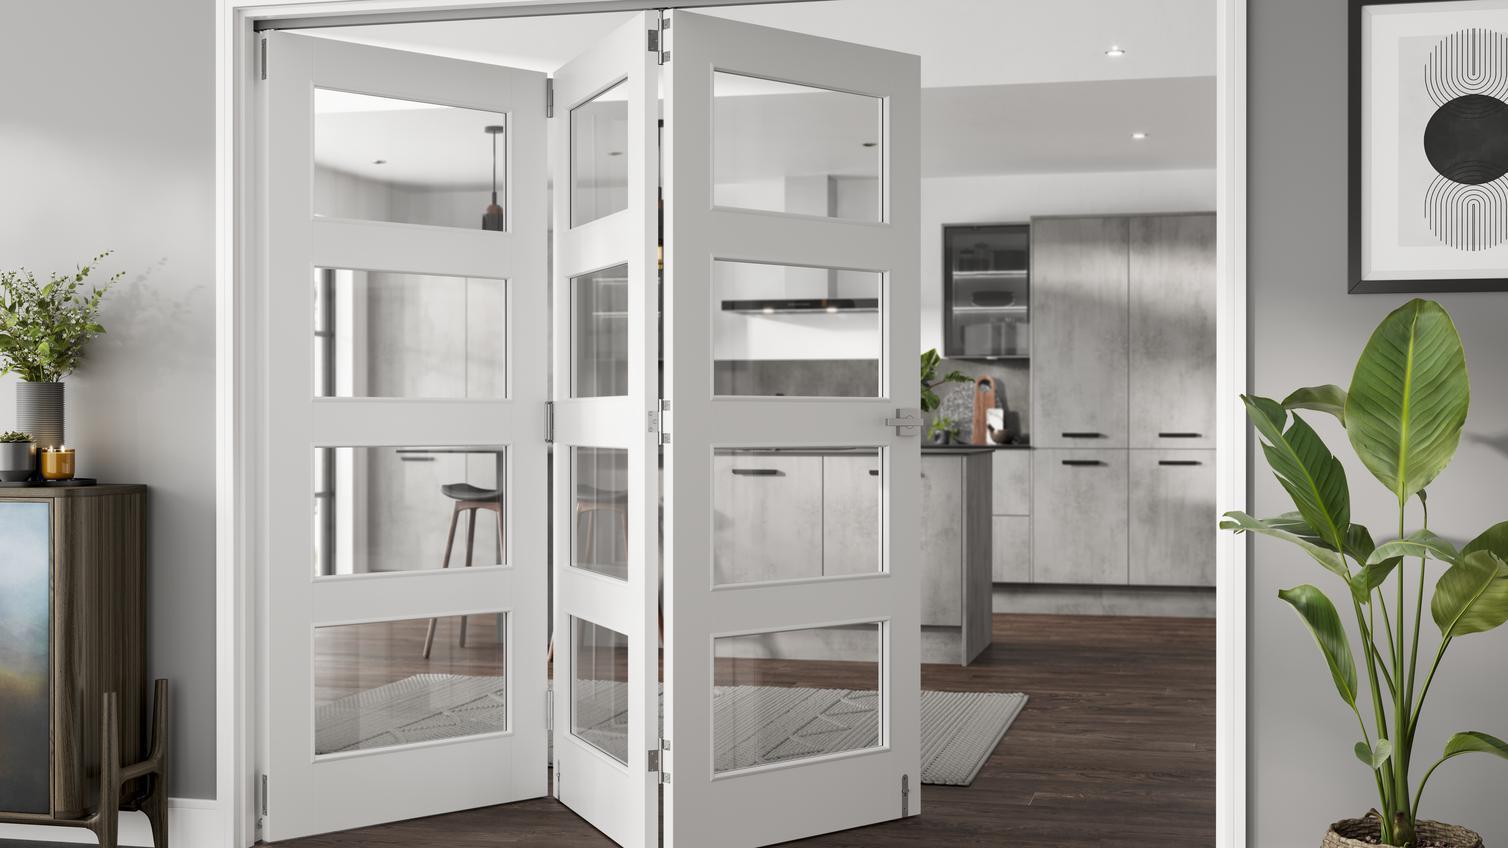 A set of white glazed doors inside a modern home, behind them is a sleek, grey kitchen and rich wooden flooring.